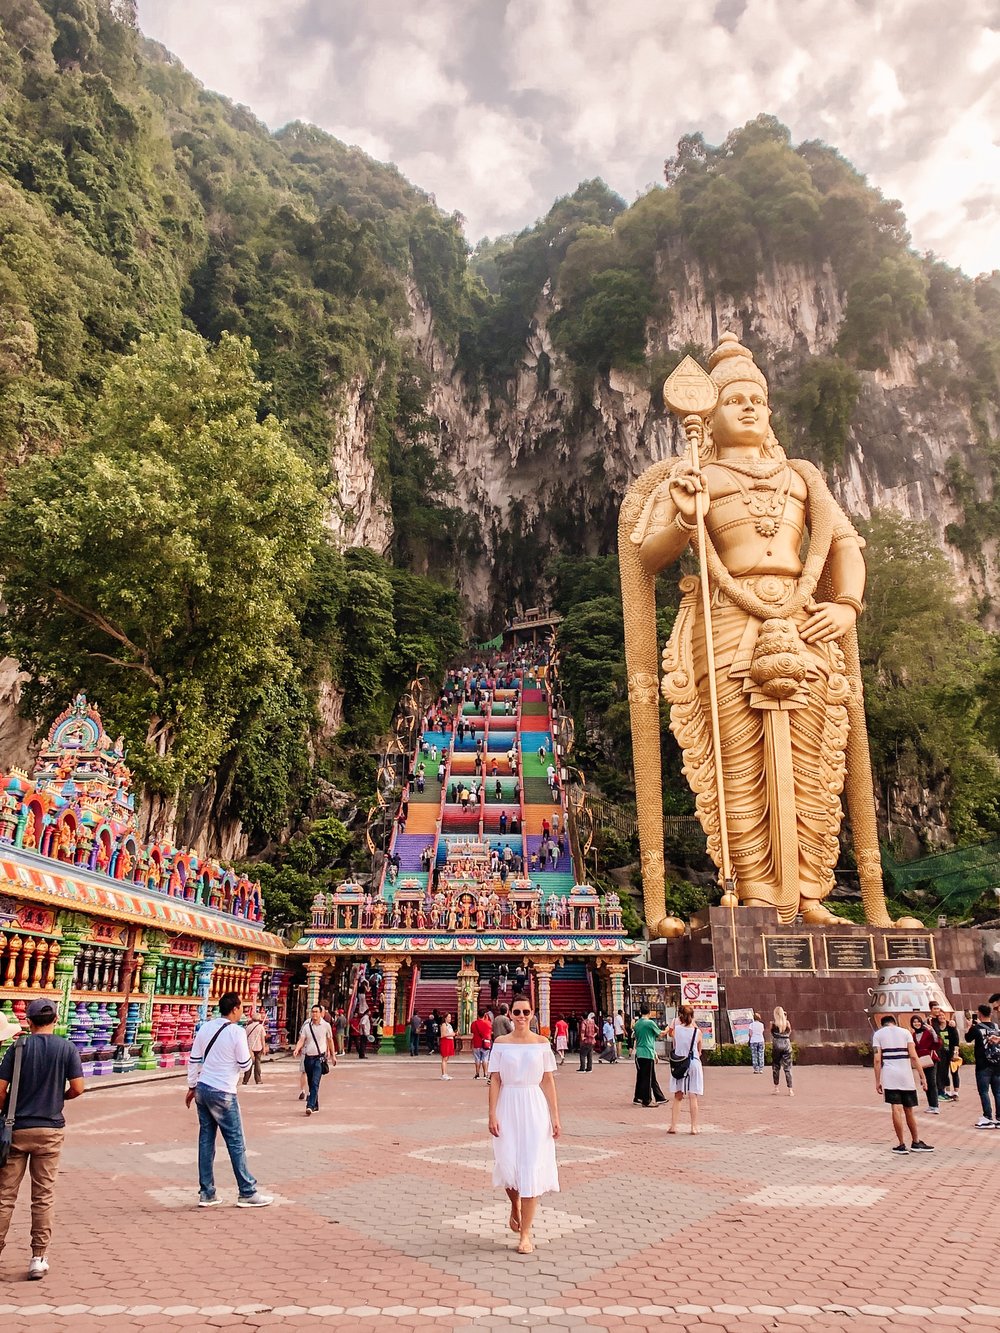 Best place to take photos at Batu Caves entrance